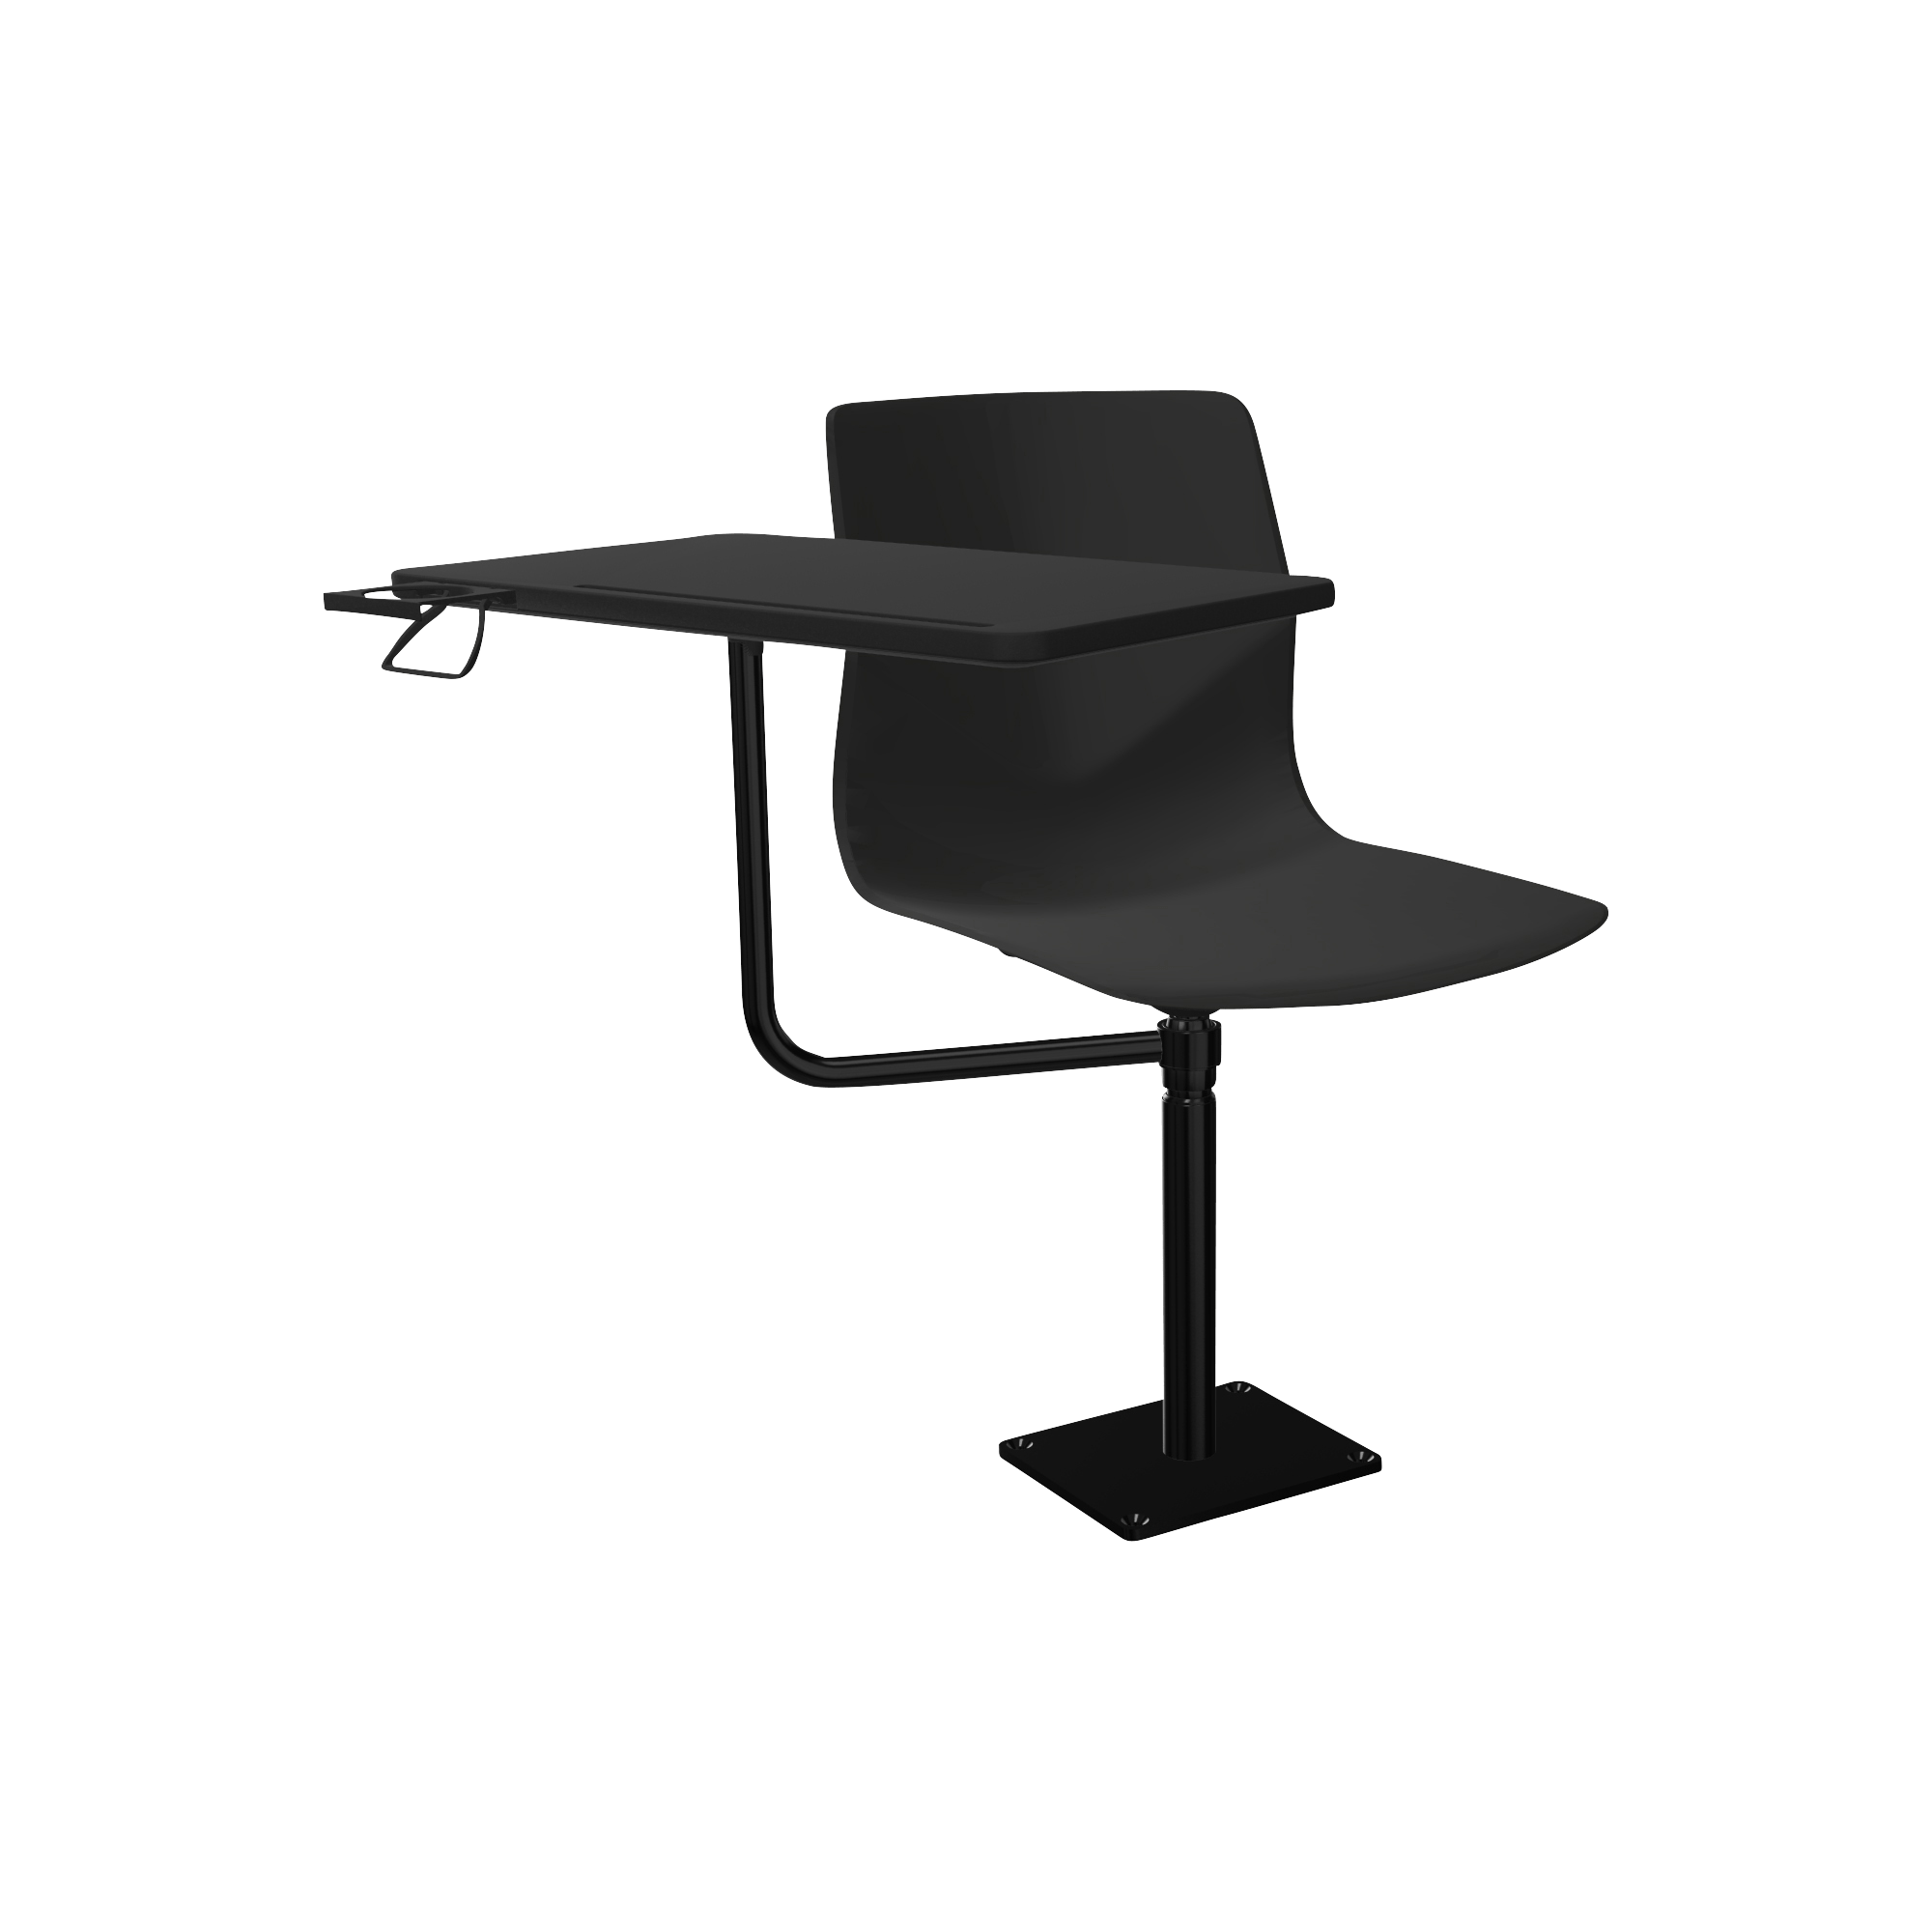 Black pedestal lecture chair with work desk attached